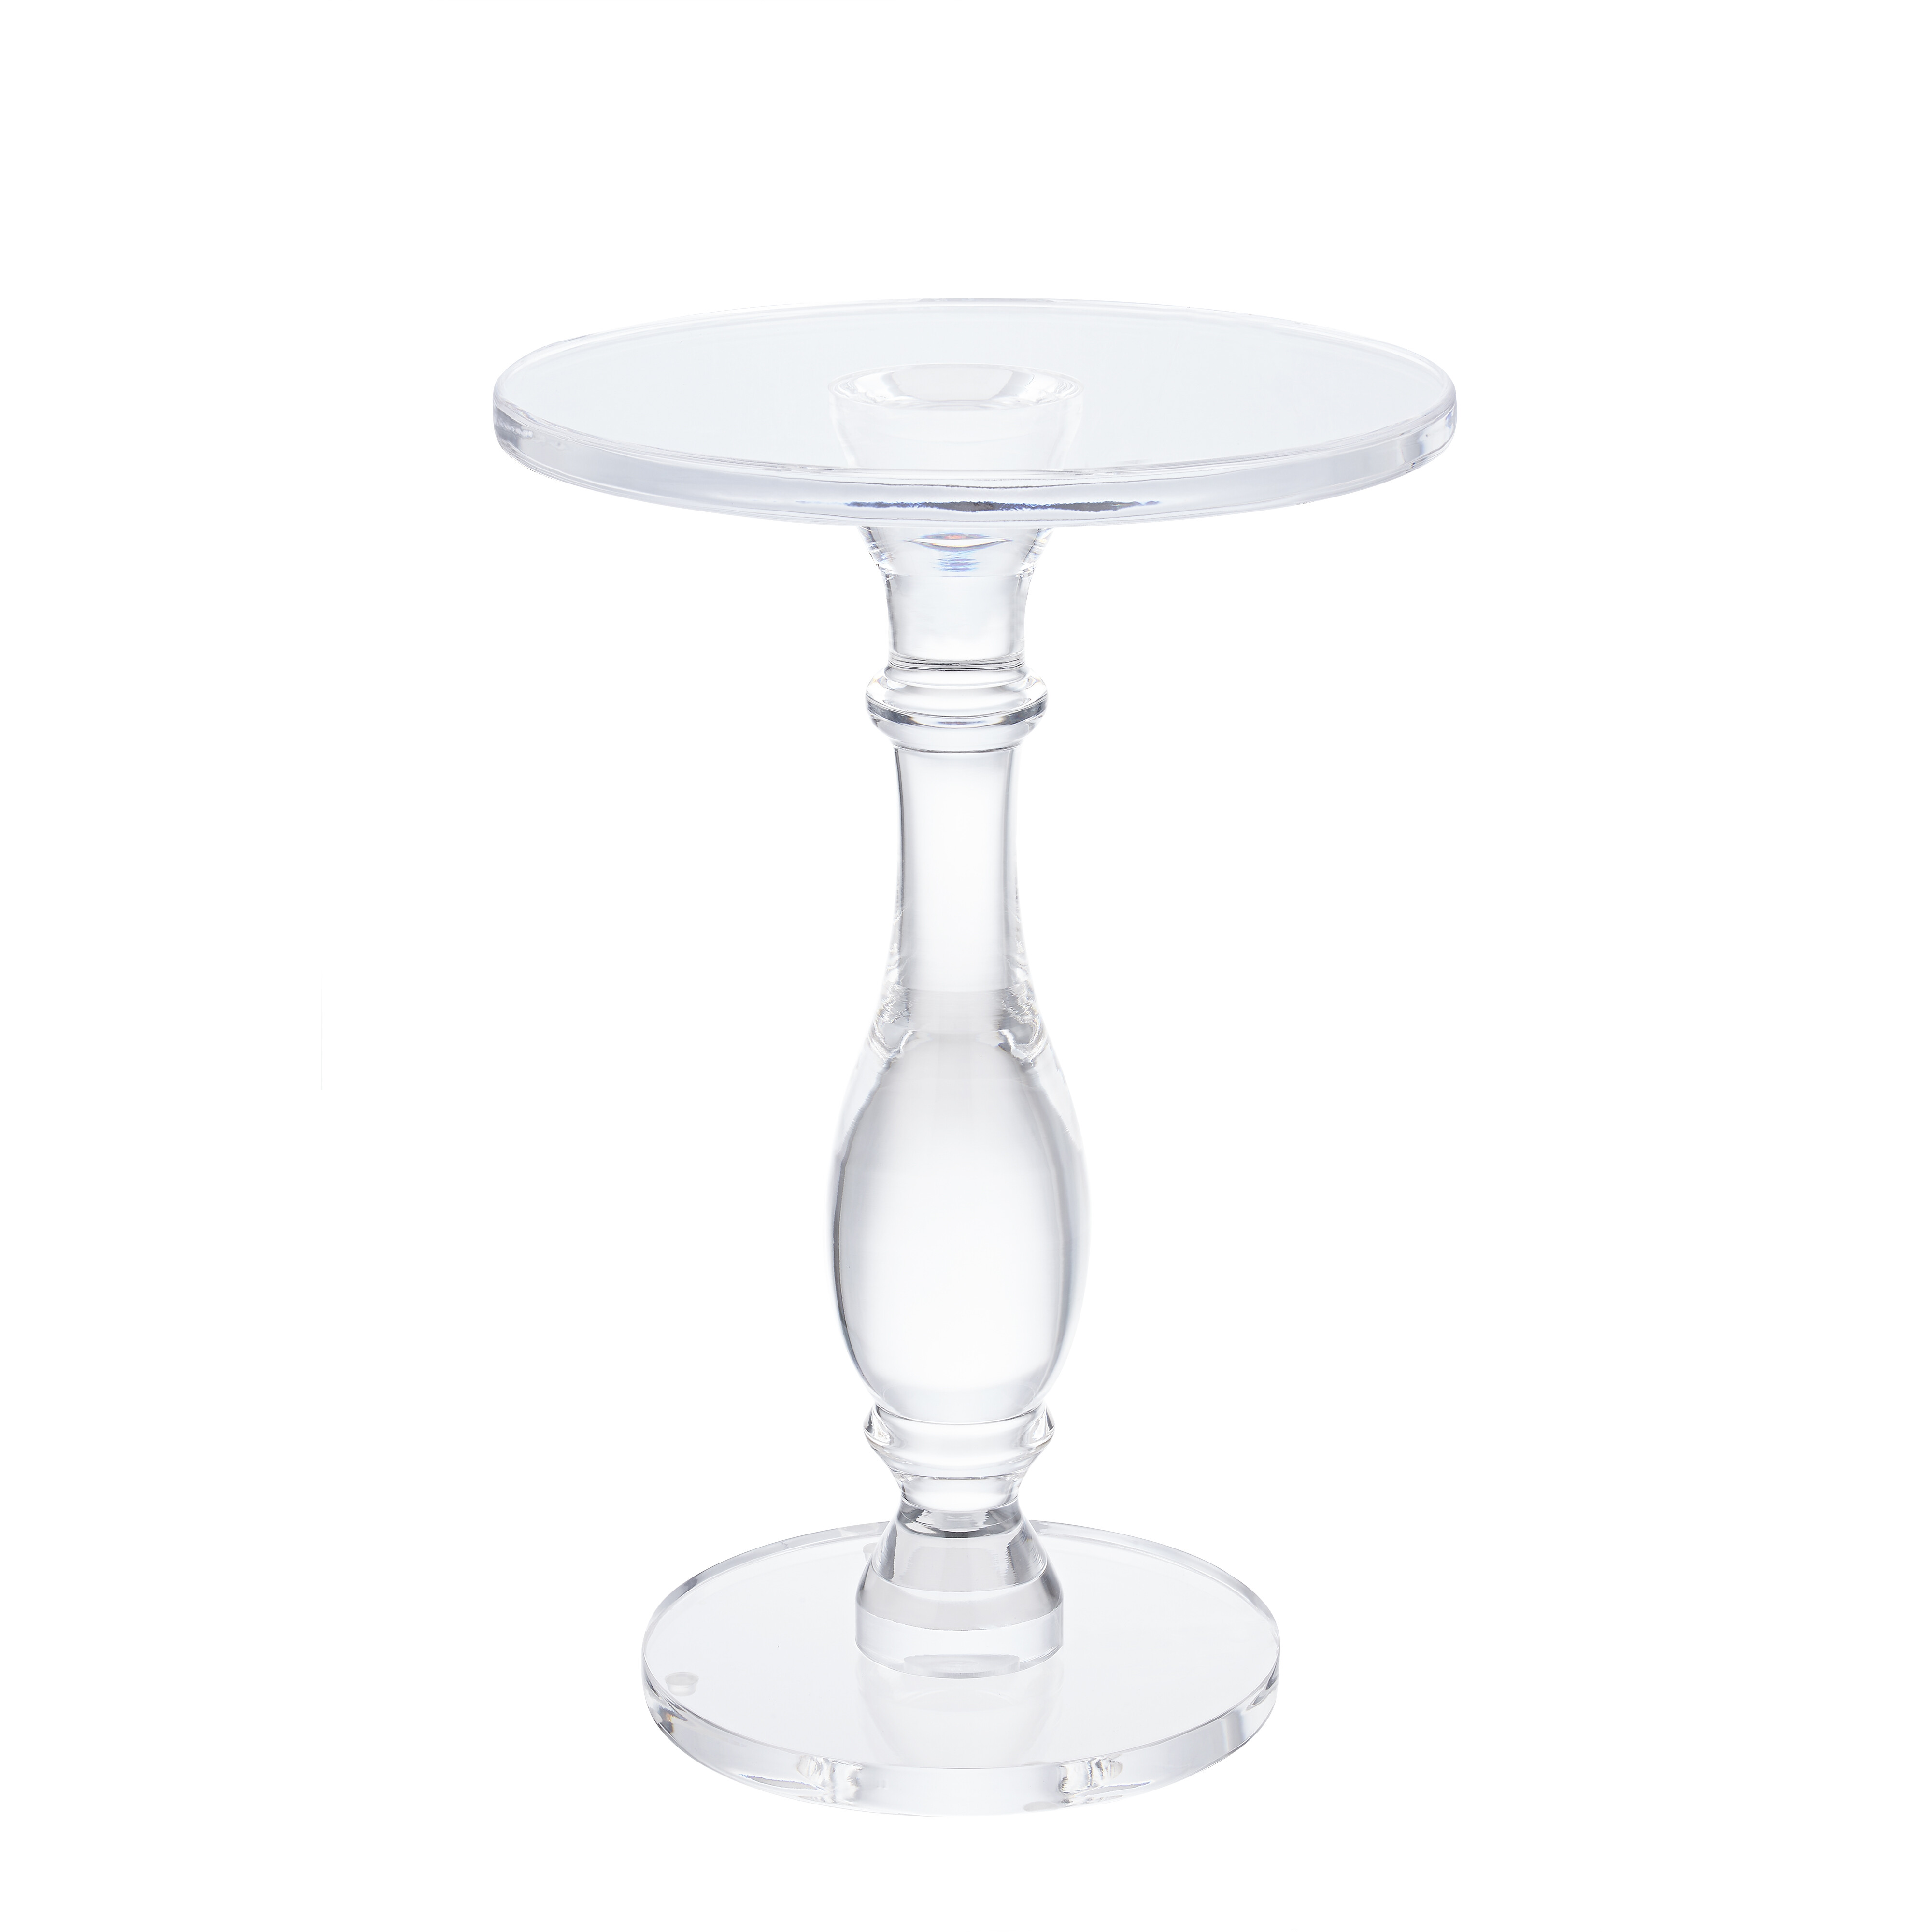 High quality acrylic end table and side table with round acrylic top